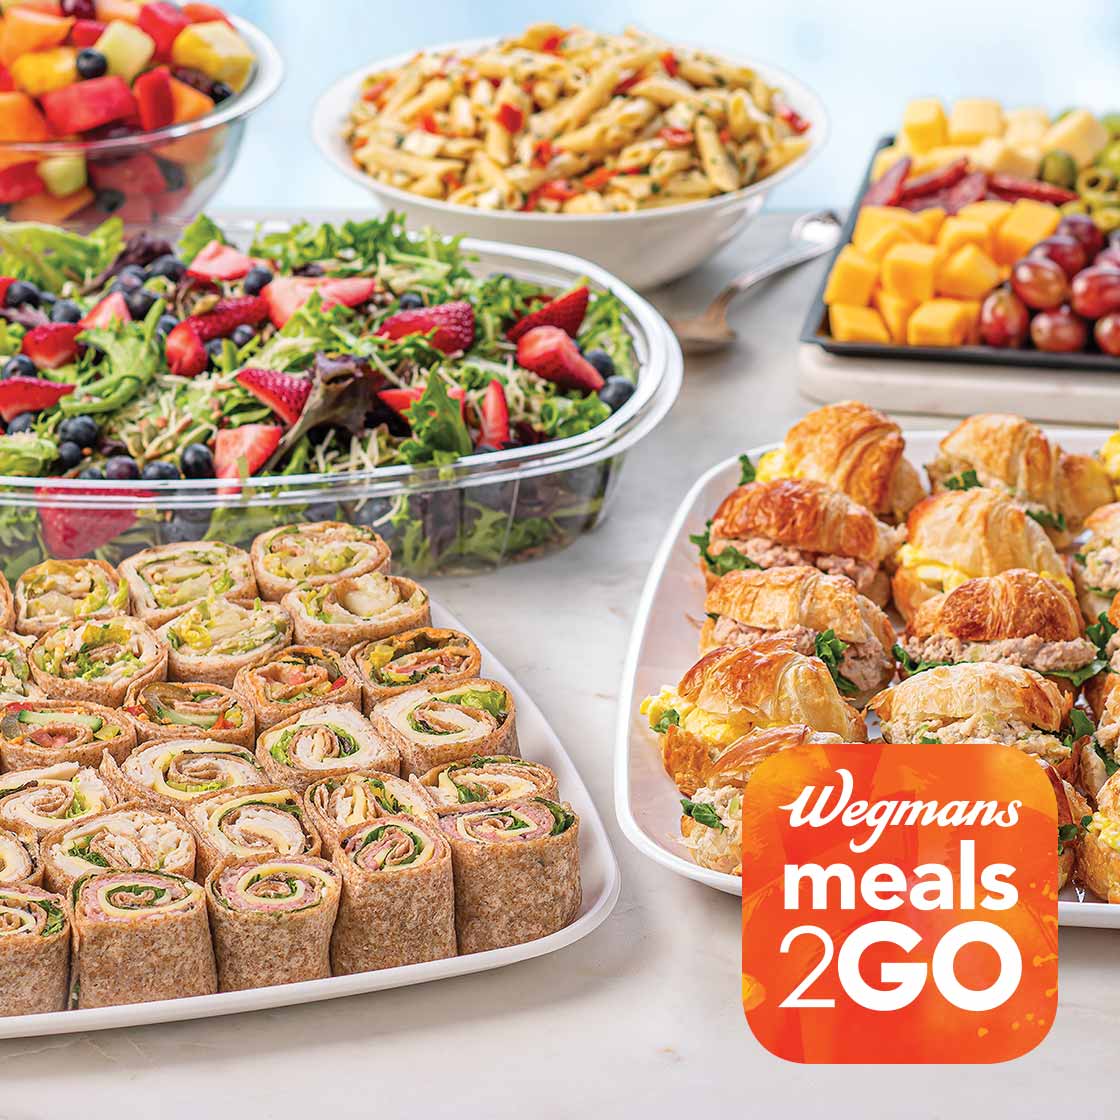 Catered items from Meals 2GO